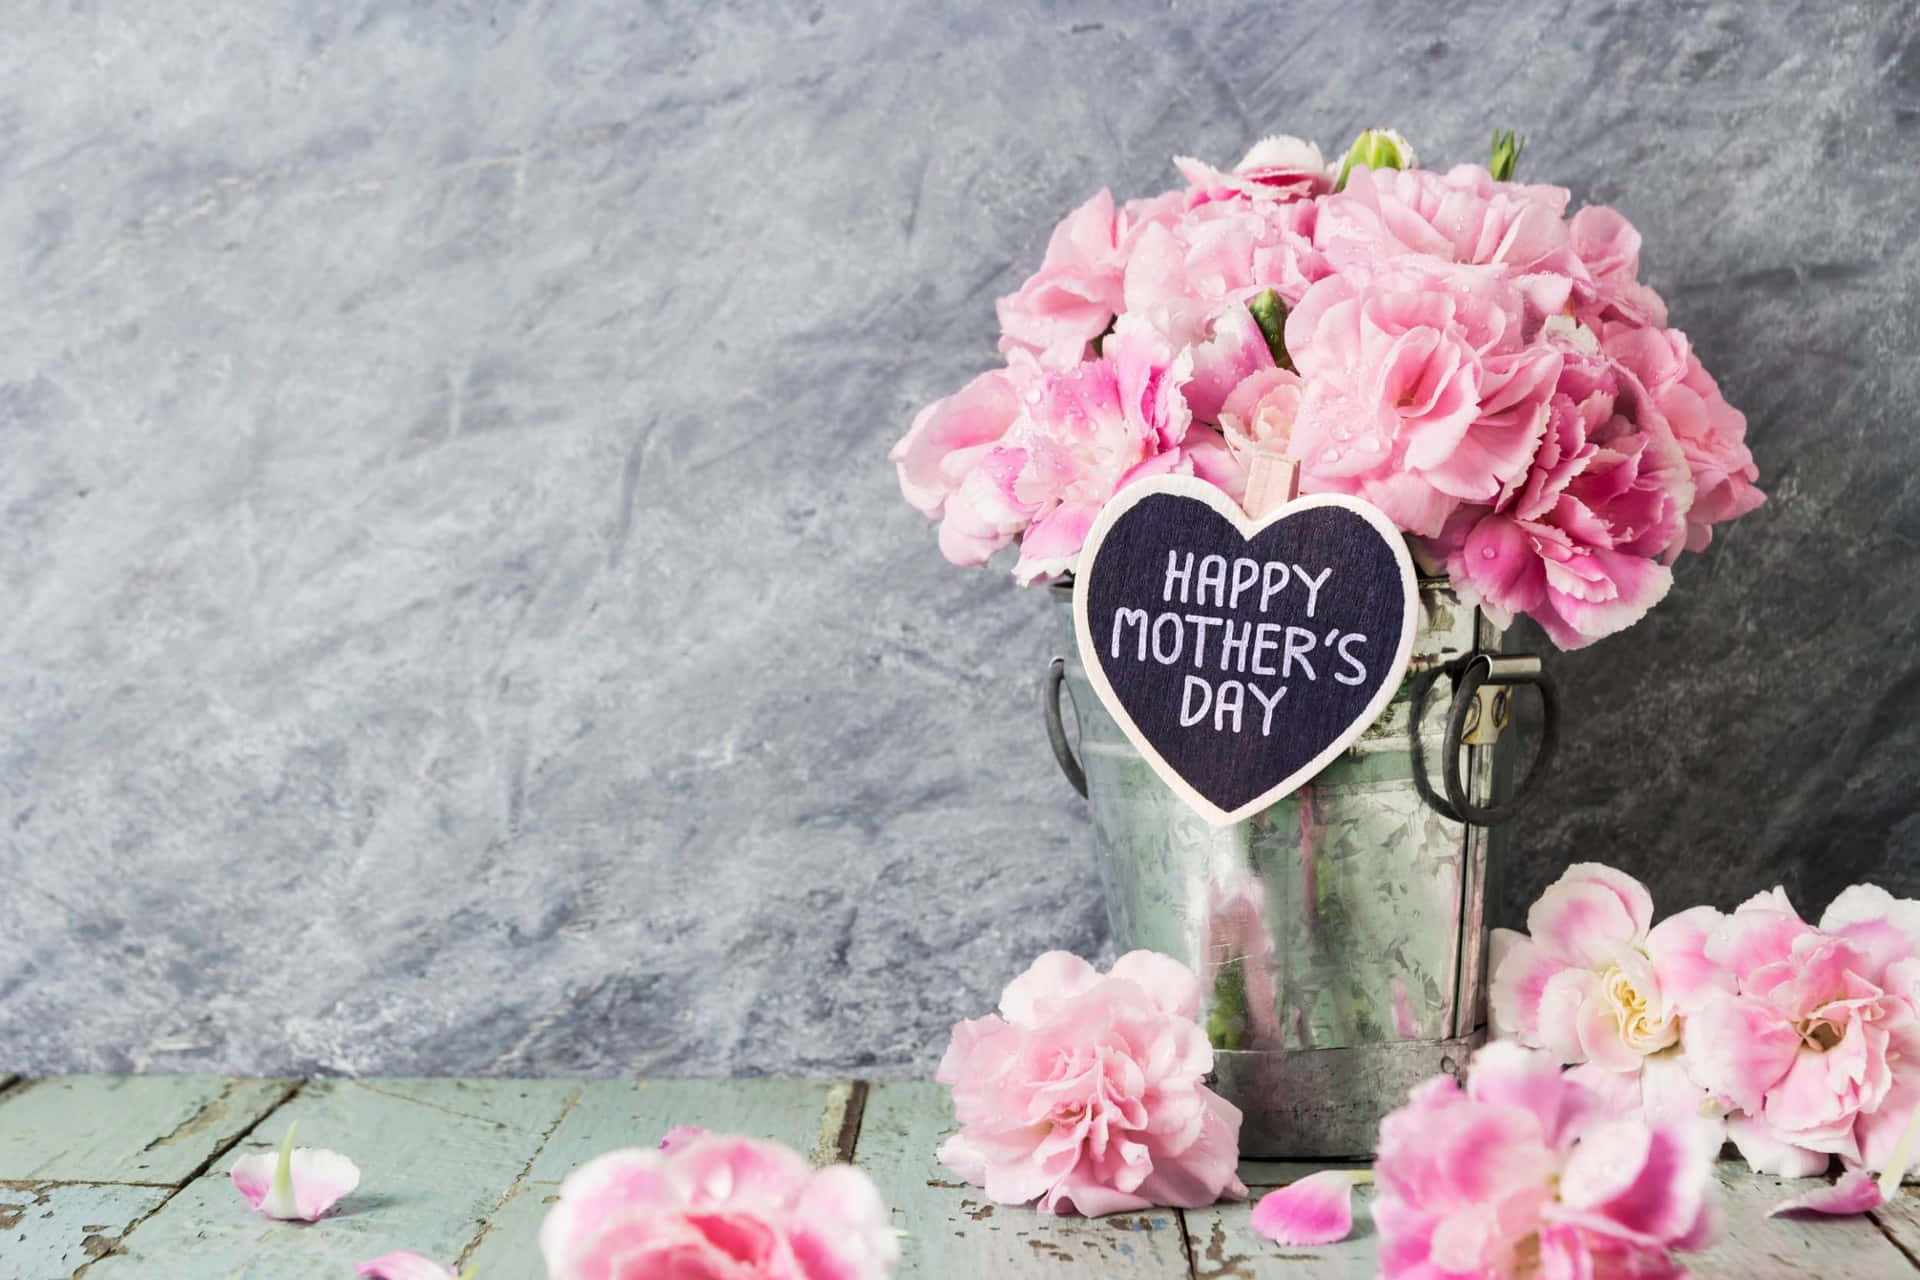 Celebrate Mother's Day with Love and Gratitude!